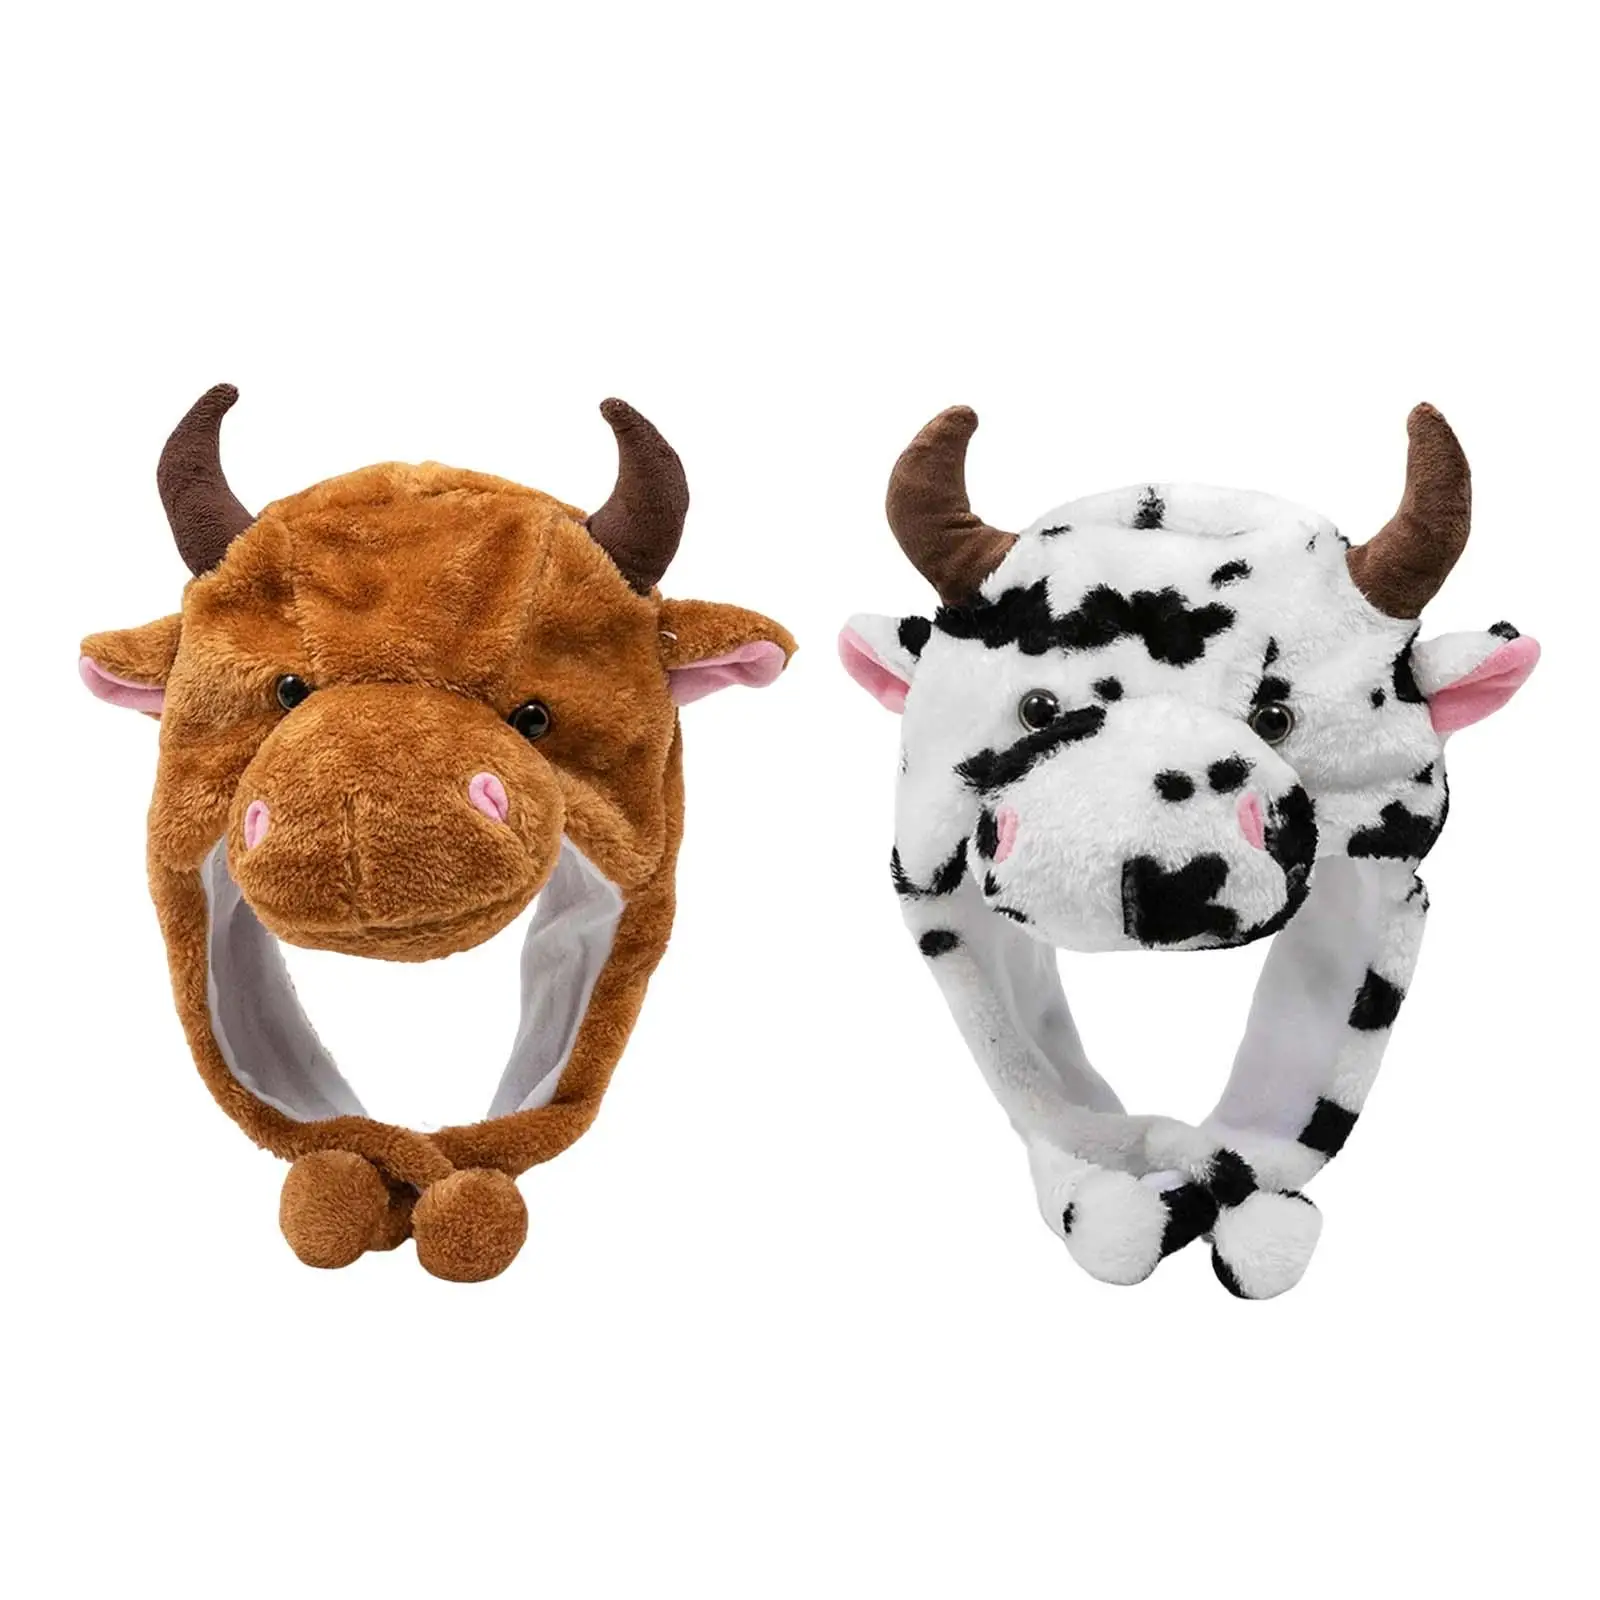 Cute Plush Animal Winter Hat Costume Fashion Cow Beanie Bull Hat Cattle Hat for Party Dress up Photo Prop Adults Kids Holiday